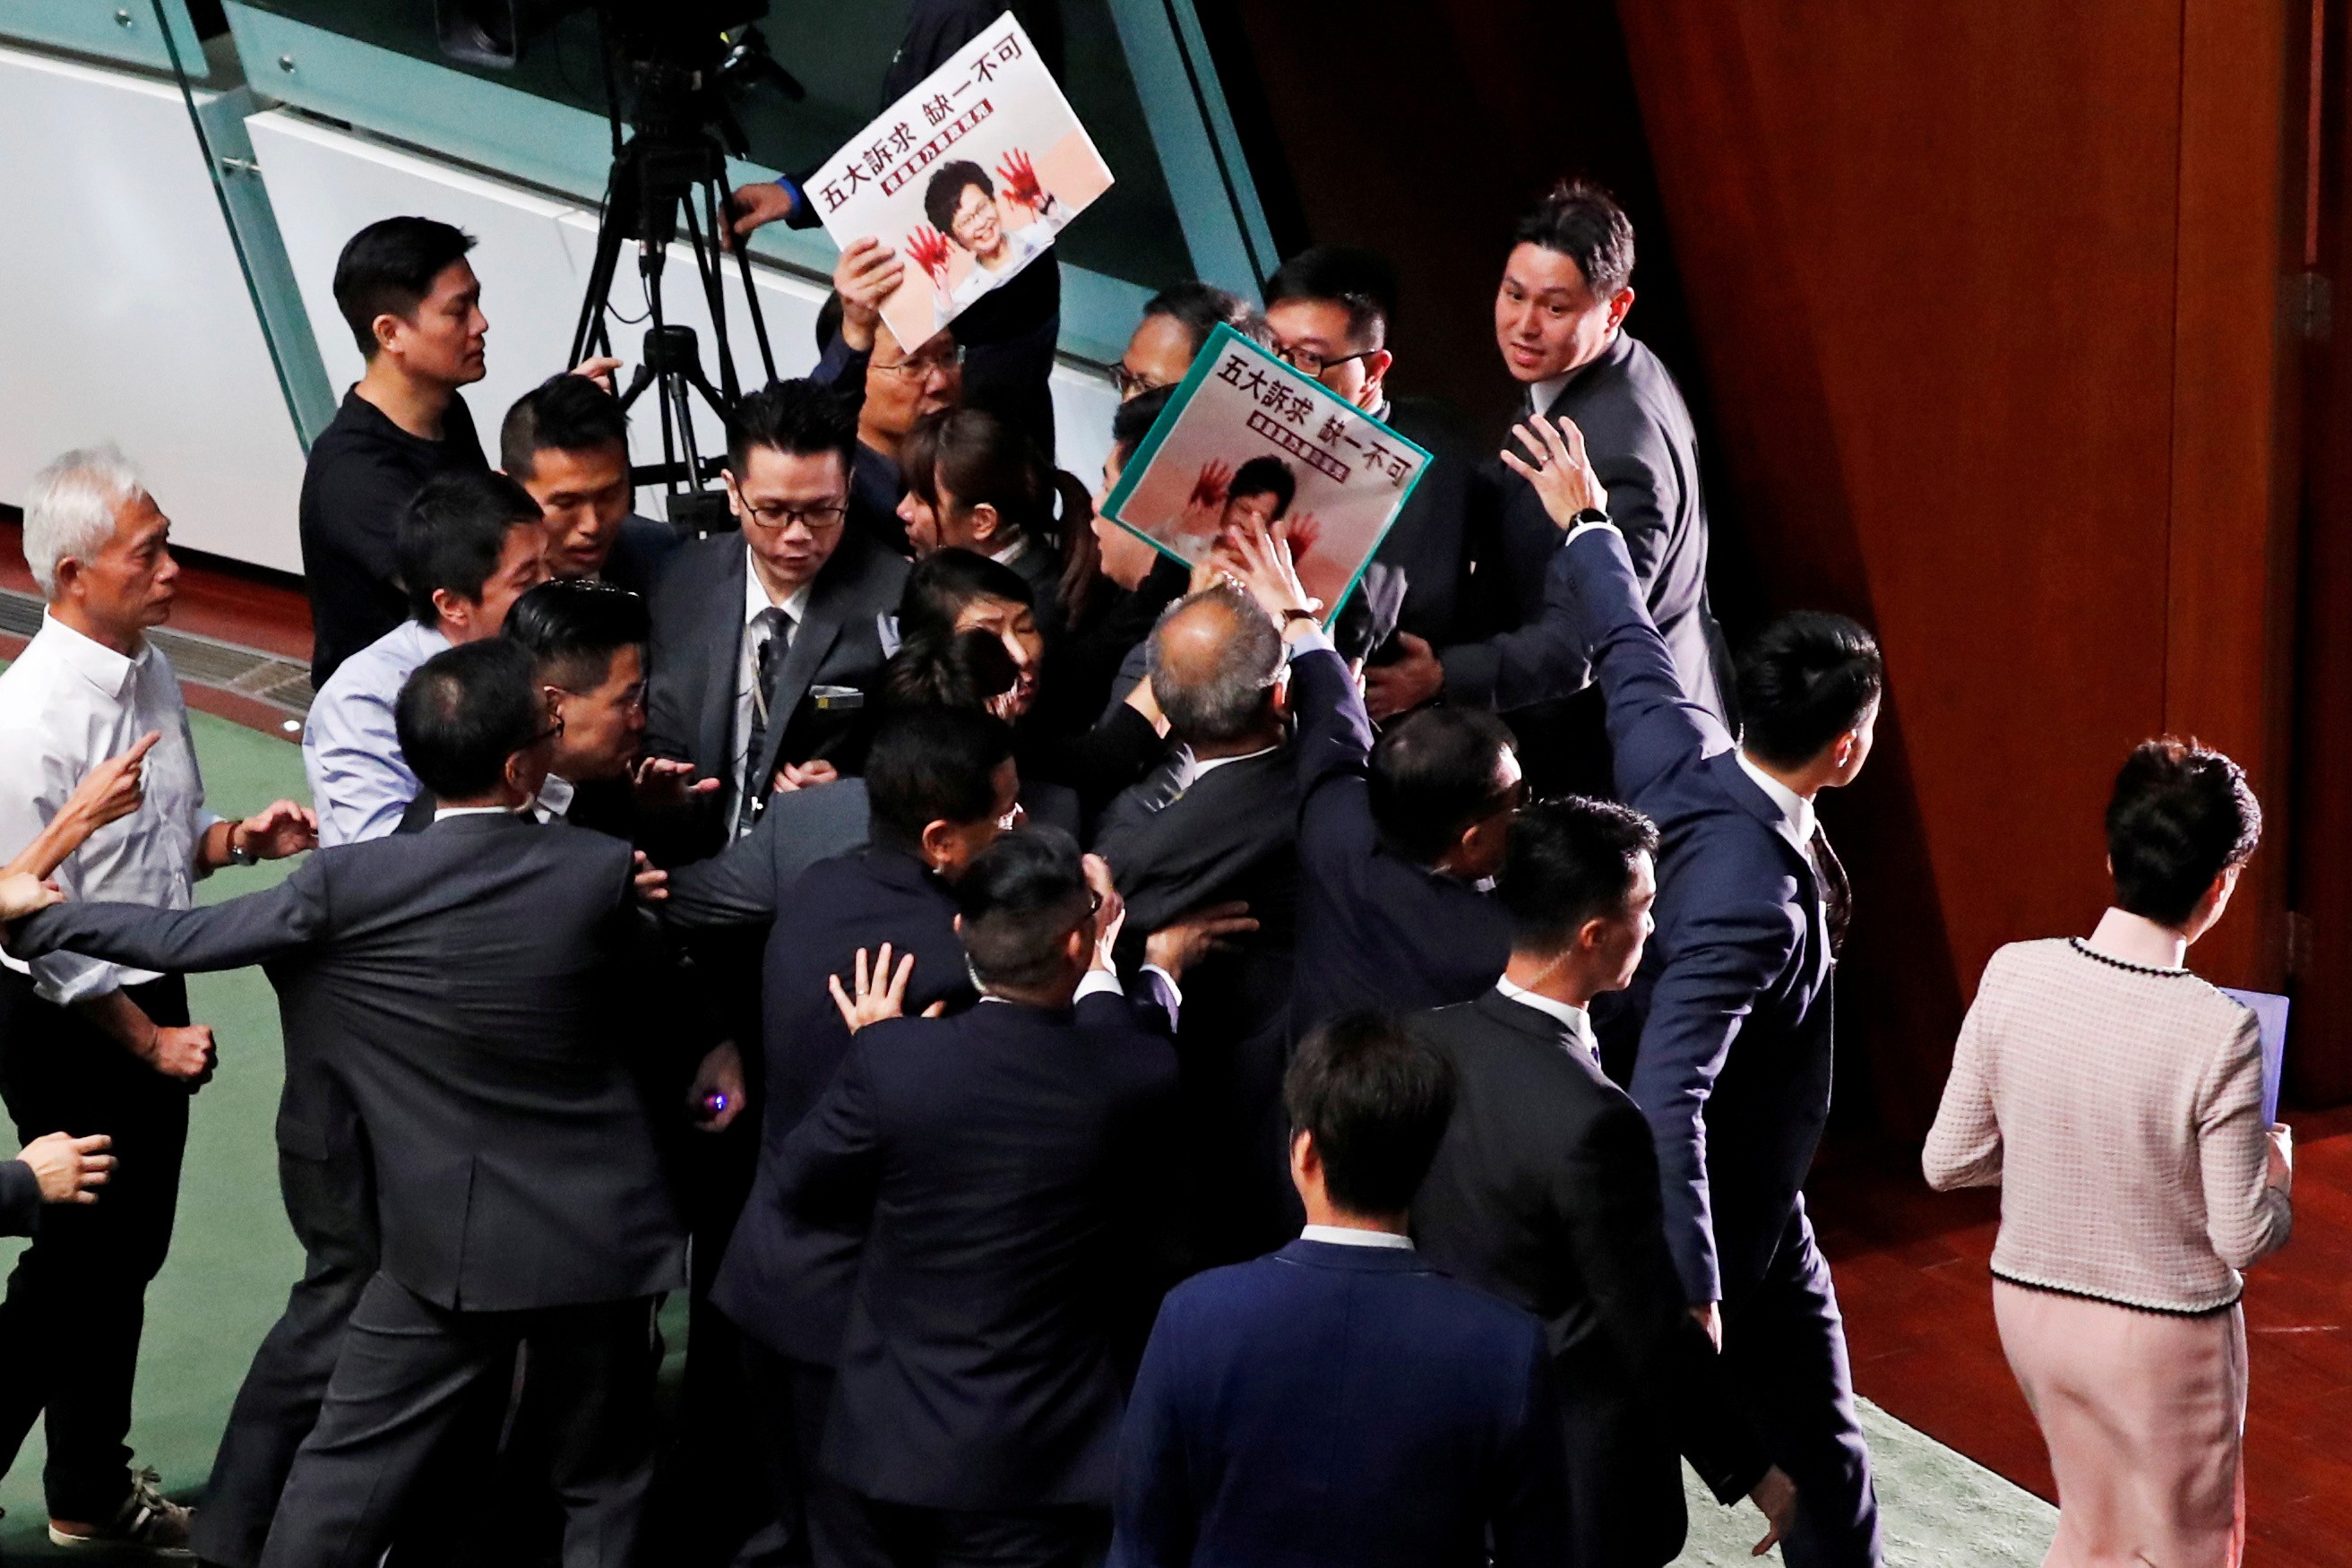 Chief Executive Carrie Lam leaves the Legislative Council chamber on October 16 without presenting her policy address after opposition lawmakers disrupt proceedings. The address was later delivered via video. Photo: Reuters